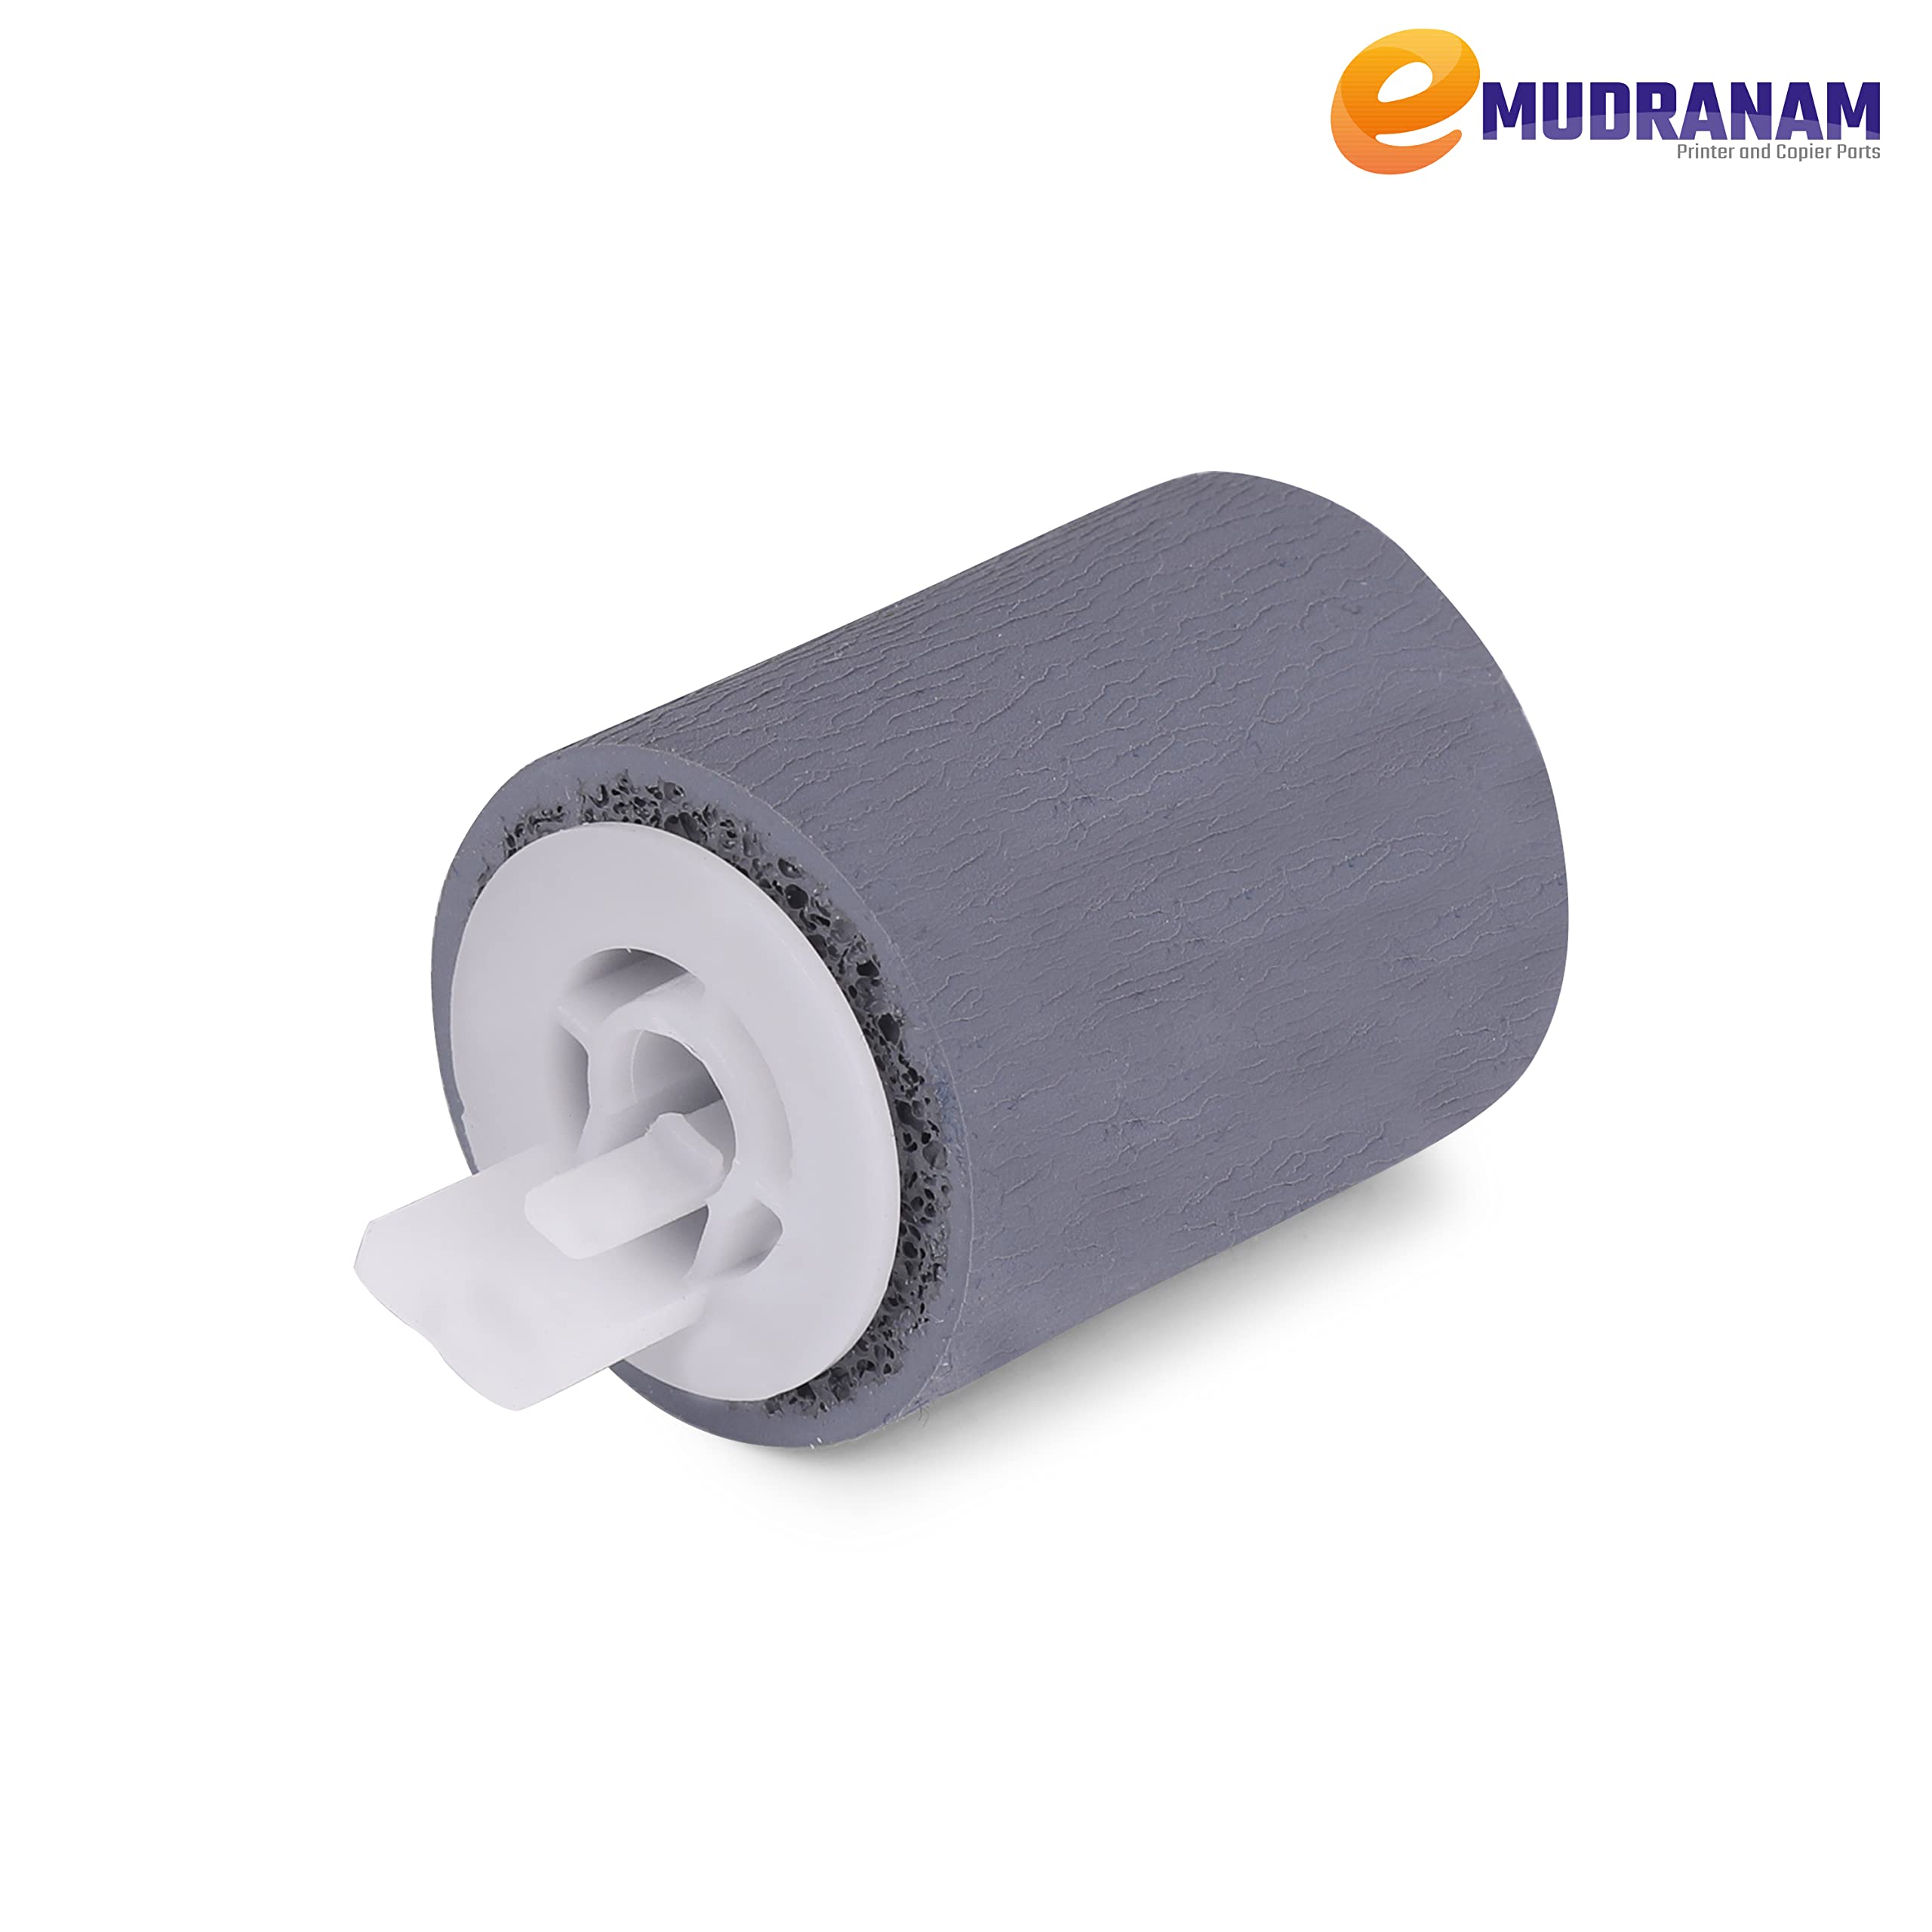 eMudranam Paper Feed Separation Roller with Plastic Hub | FC6-6661-000 | FC6 6661 000